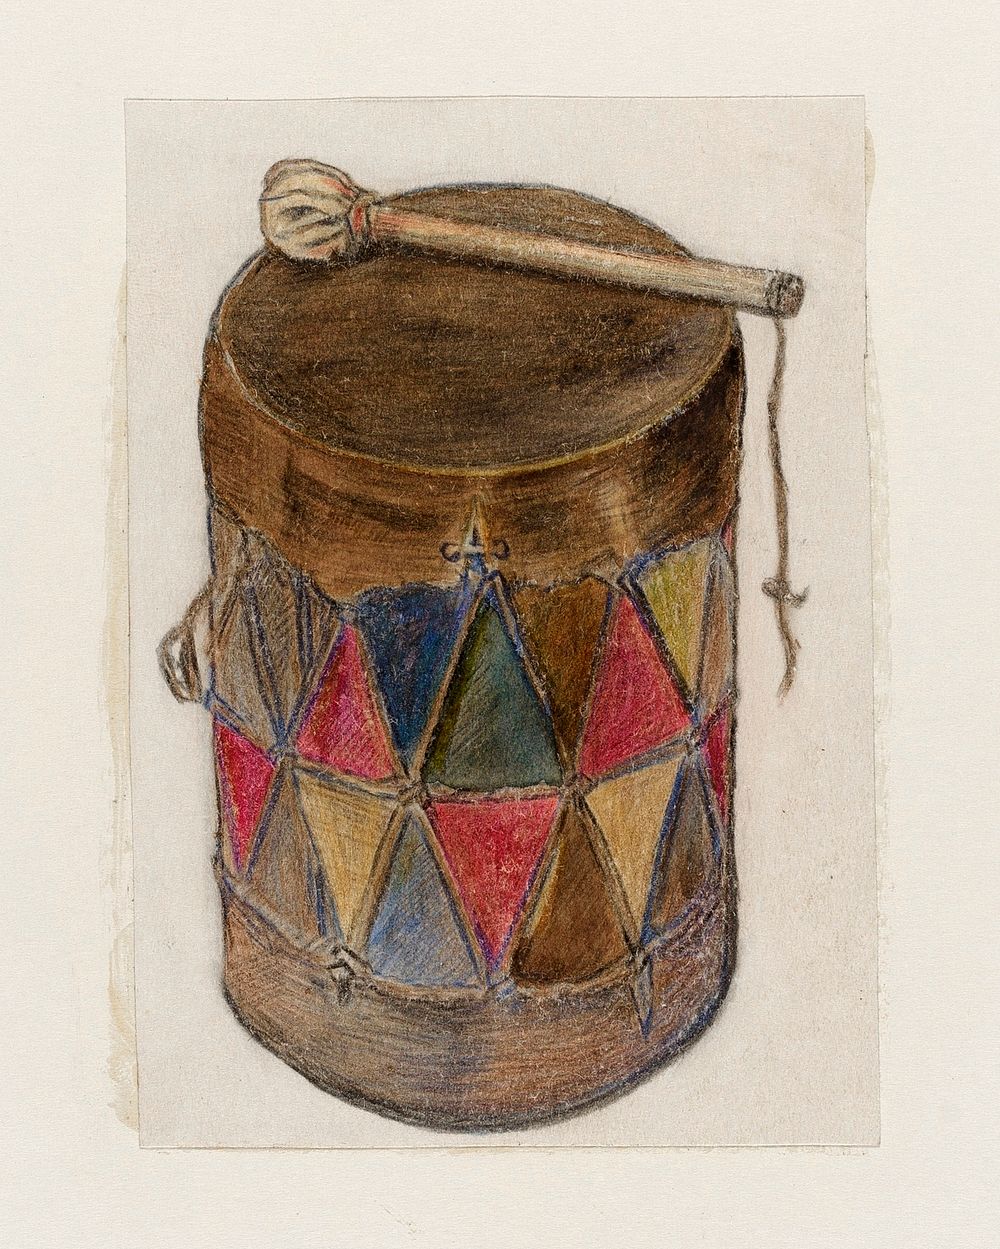 Drum (1935&ndash;1942) by Charles Charon. Original from The National Gallery of Art. Digitally enhanced by rawpixel.